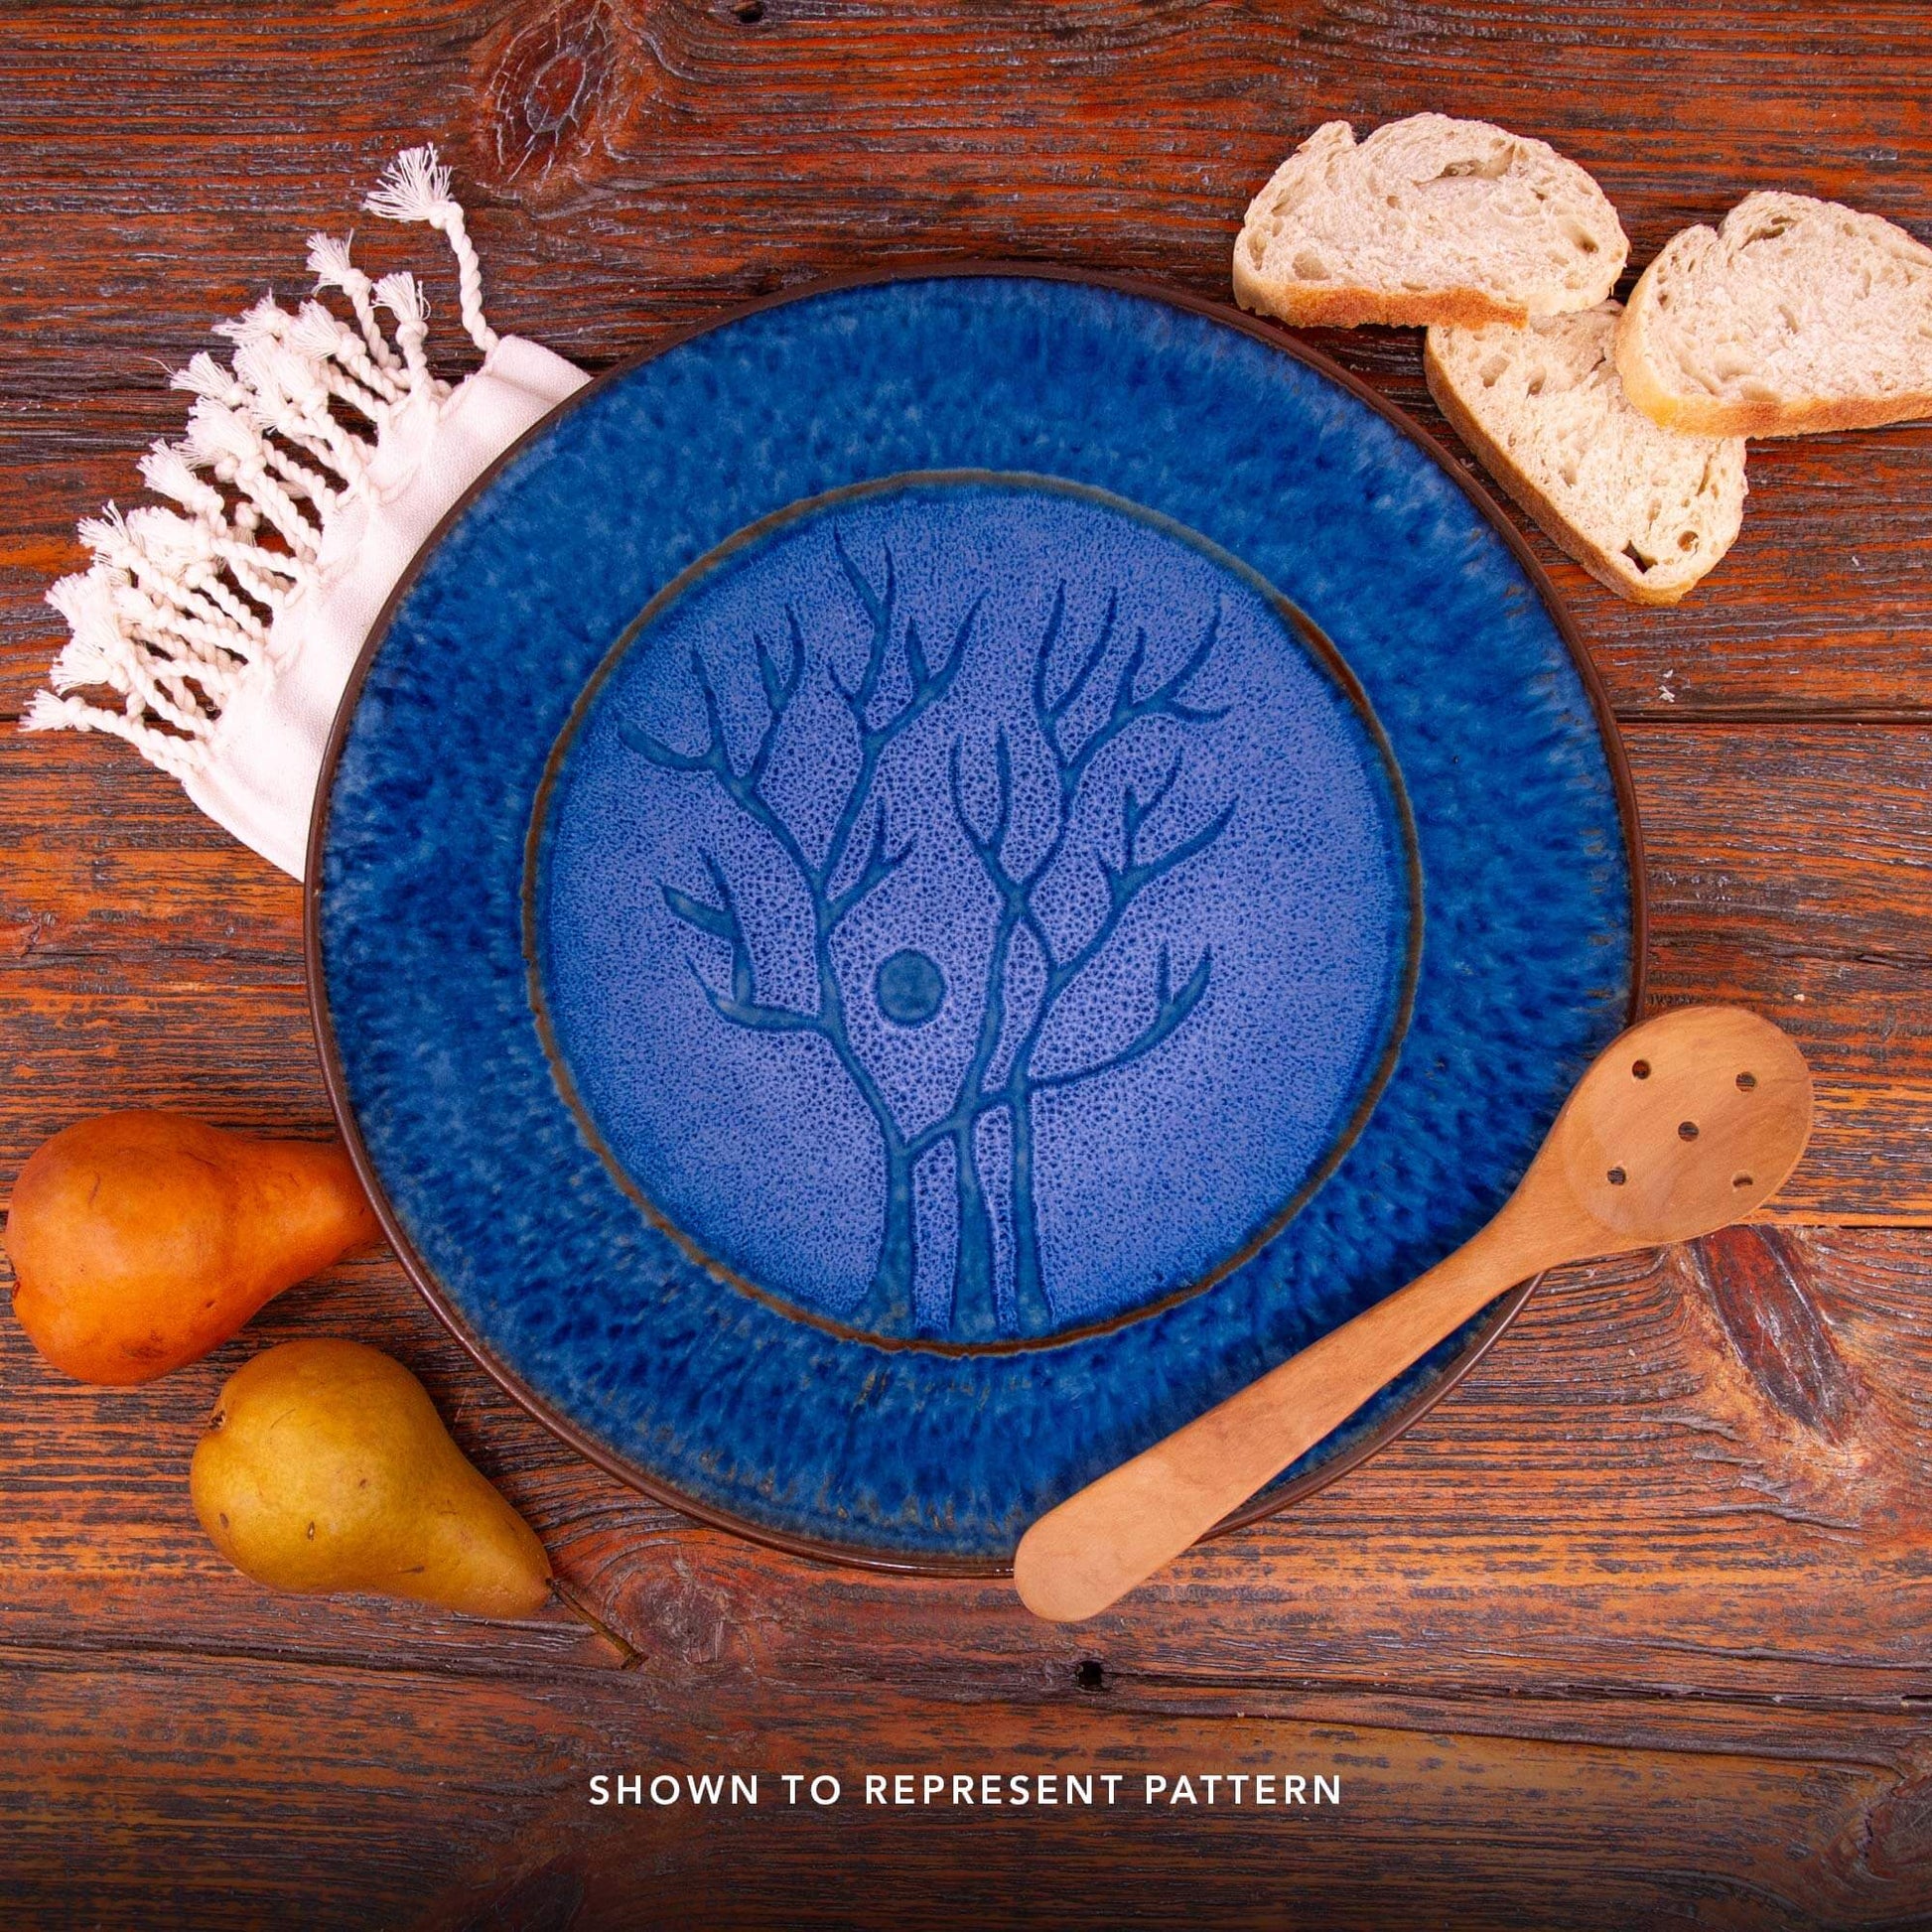 Handmade Pottery 14" Round Platter in Blue Tree pattern made by Georgetown Pottery in Maine